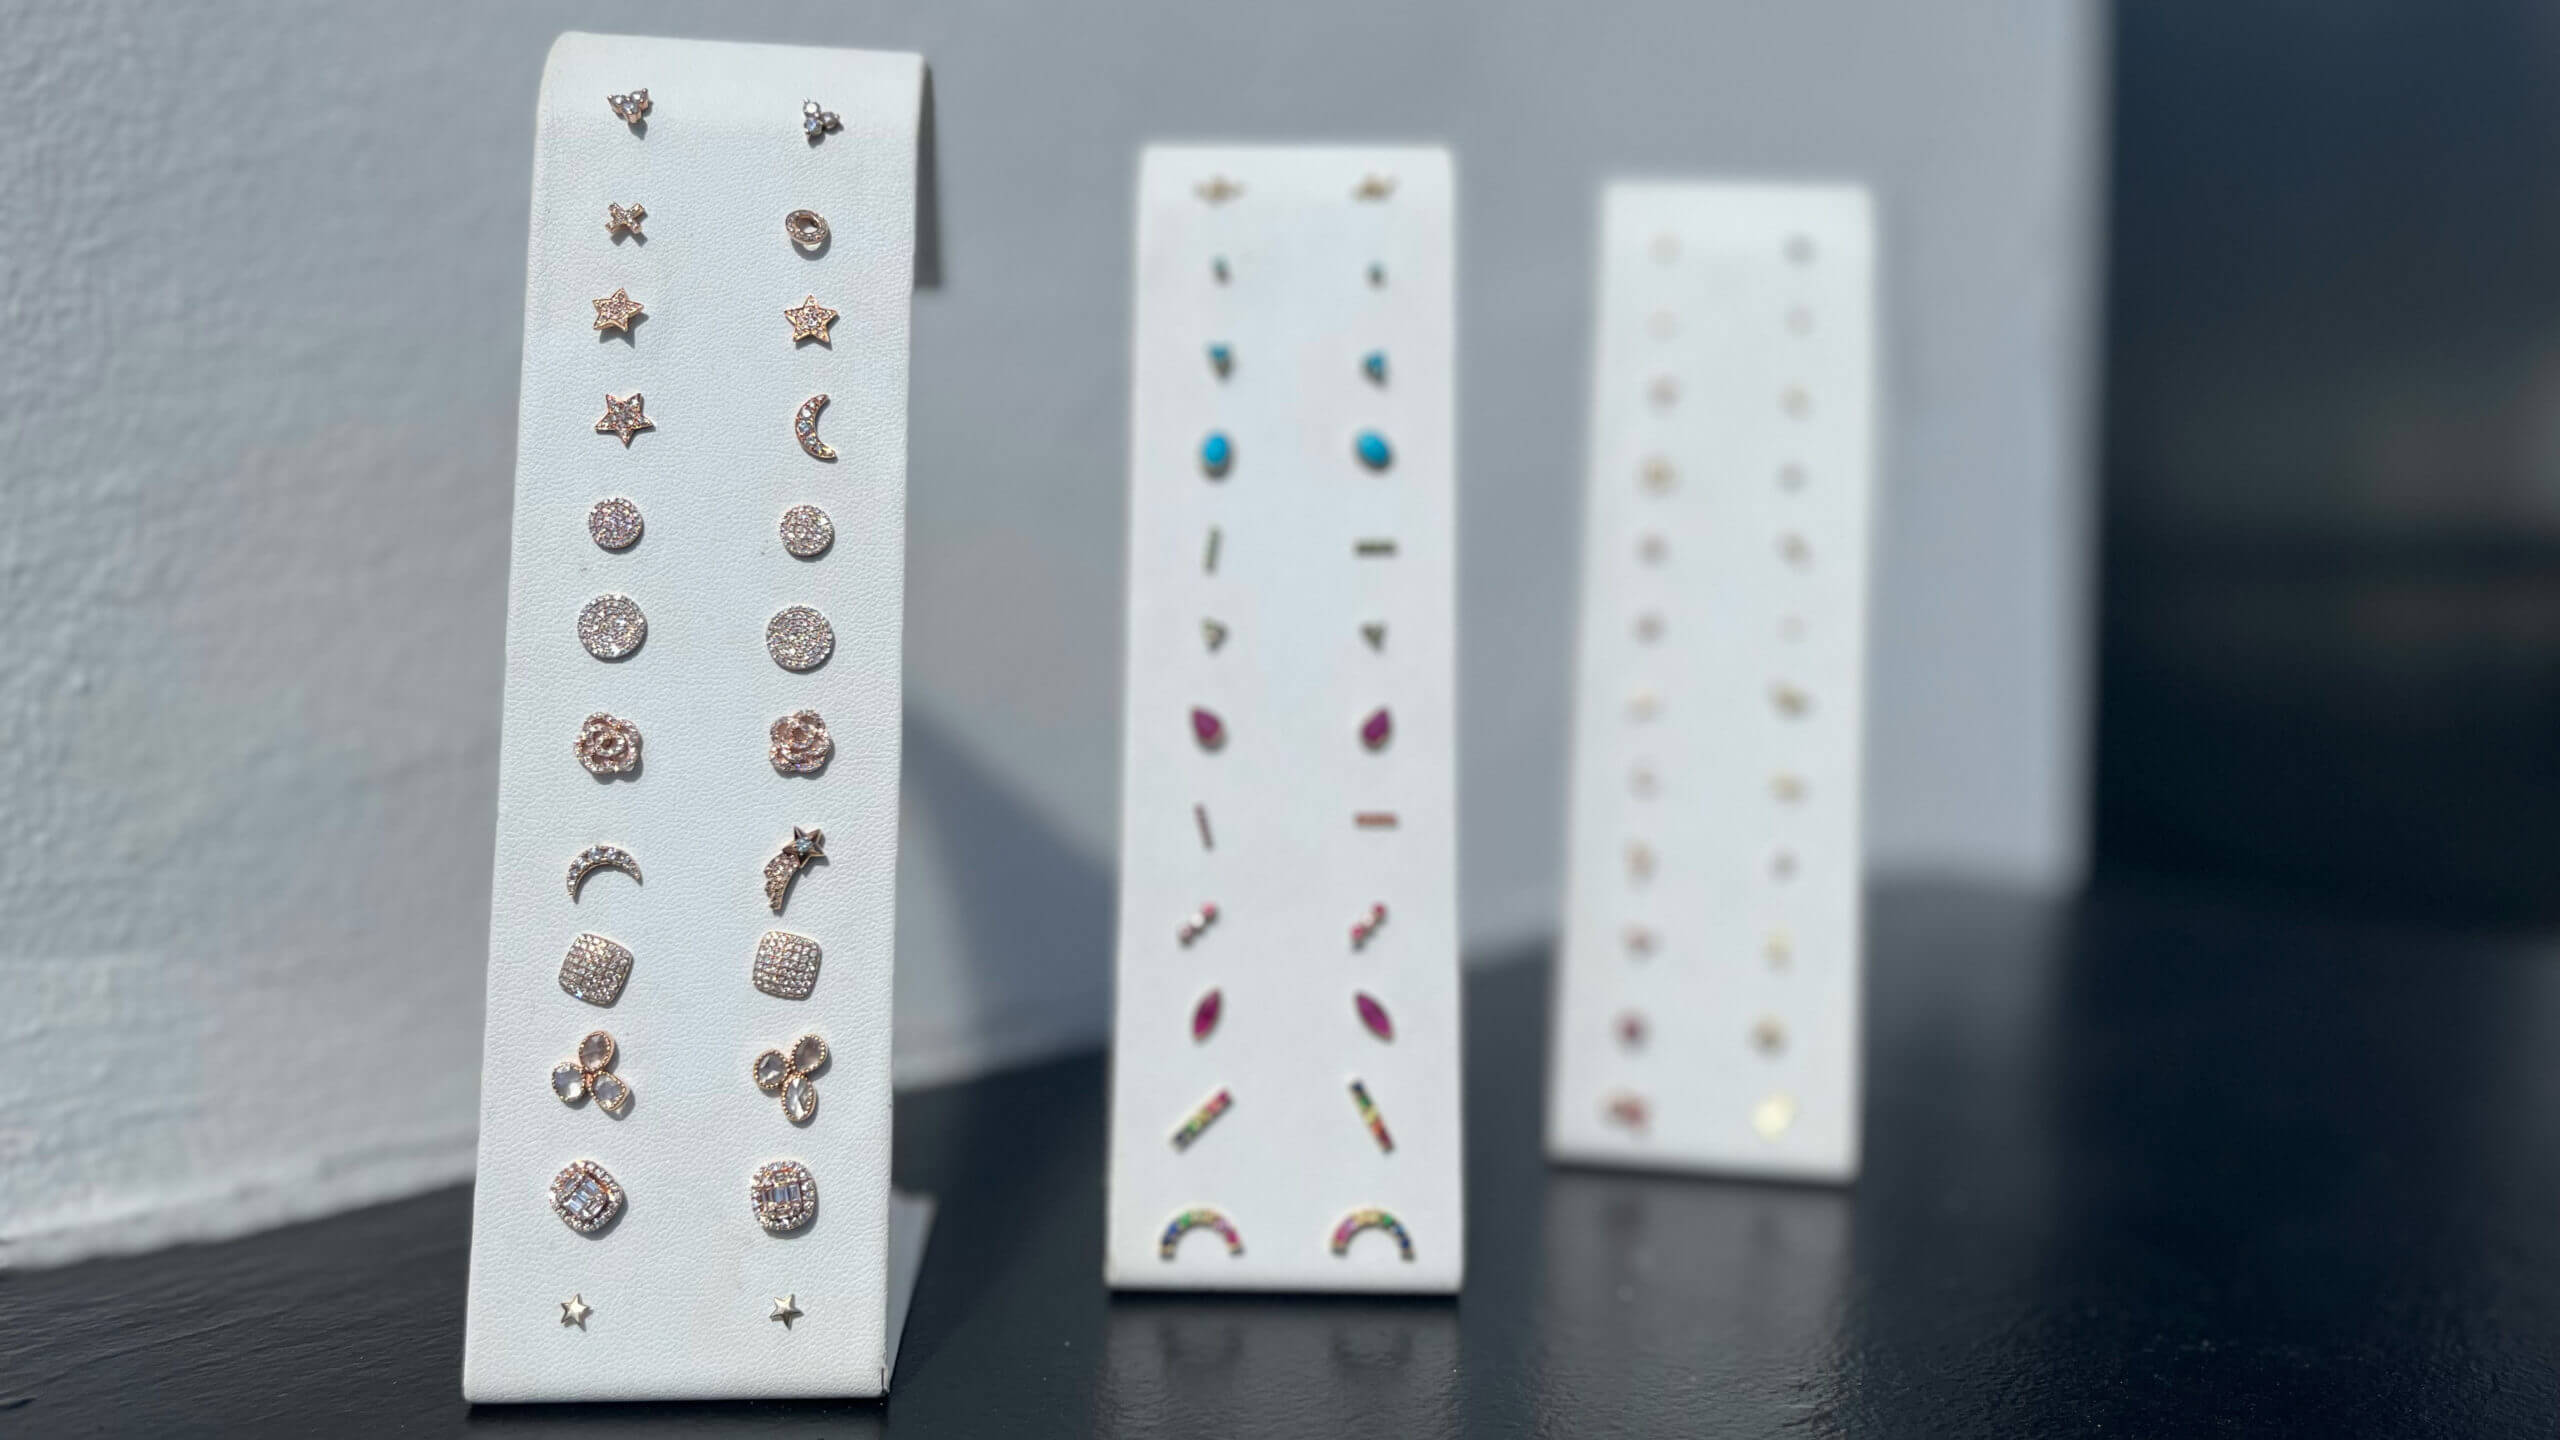 Some Studs Available at Moondance Jewelry Gallery